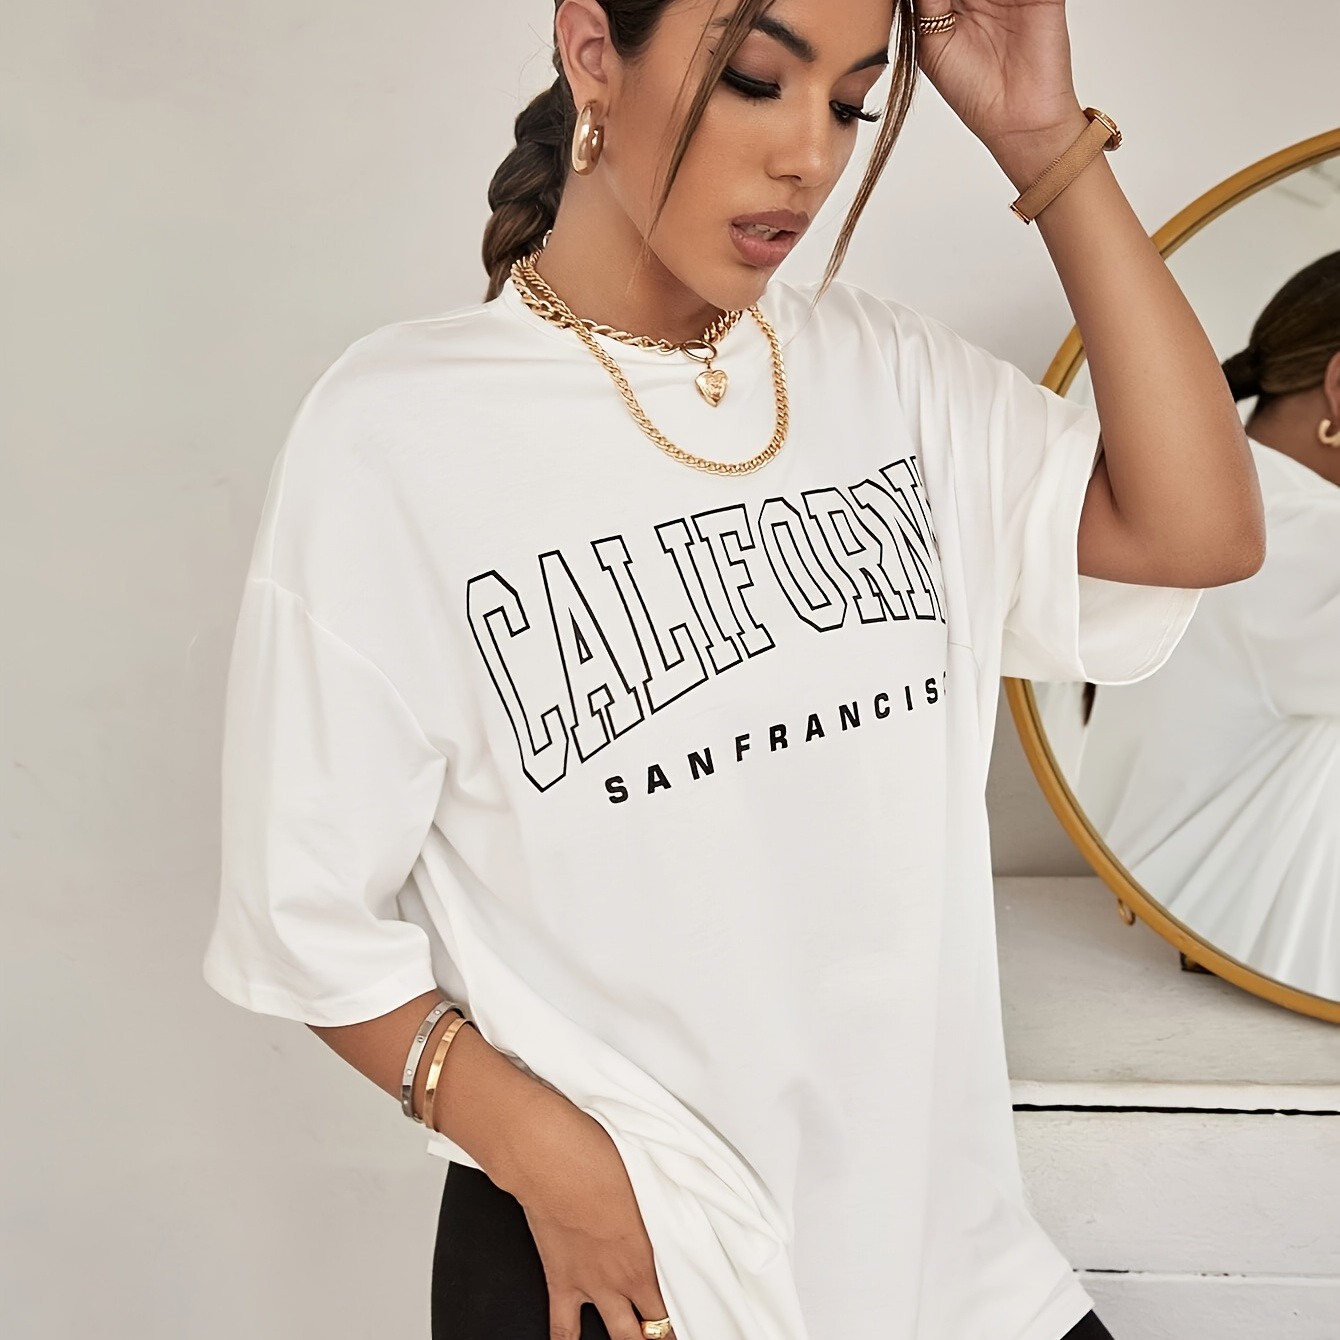 

California Print Two-piece Set, Casual Short Sleeve T-shirt & Skinny Shorts Outfits, Women's Clothing